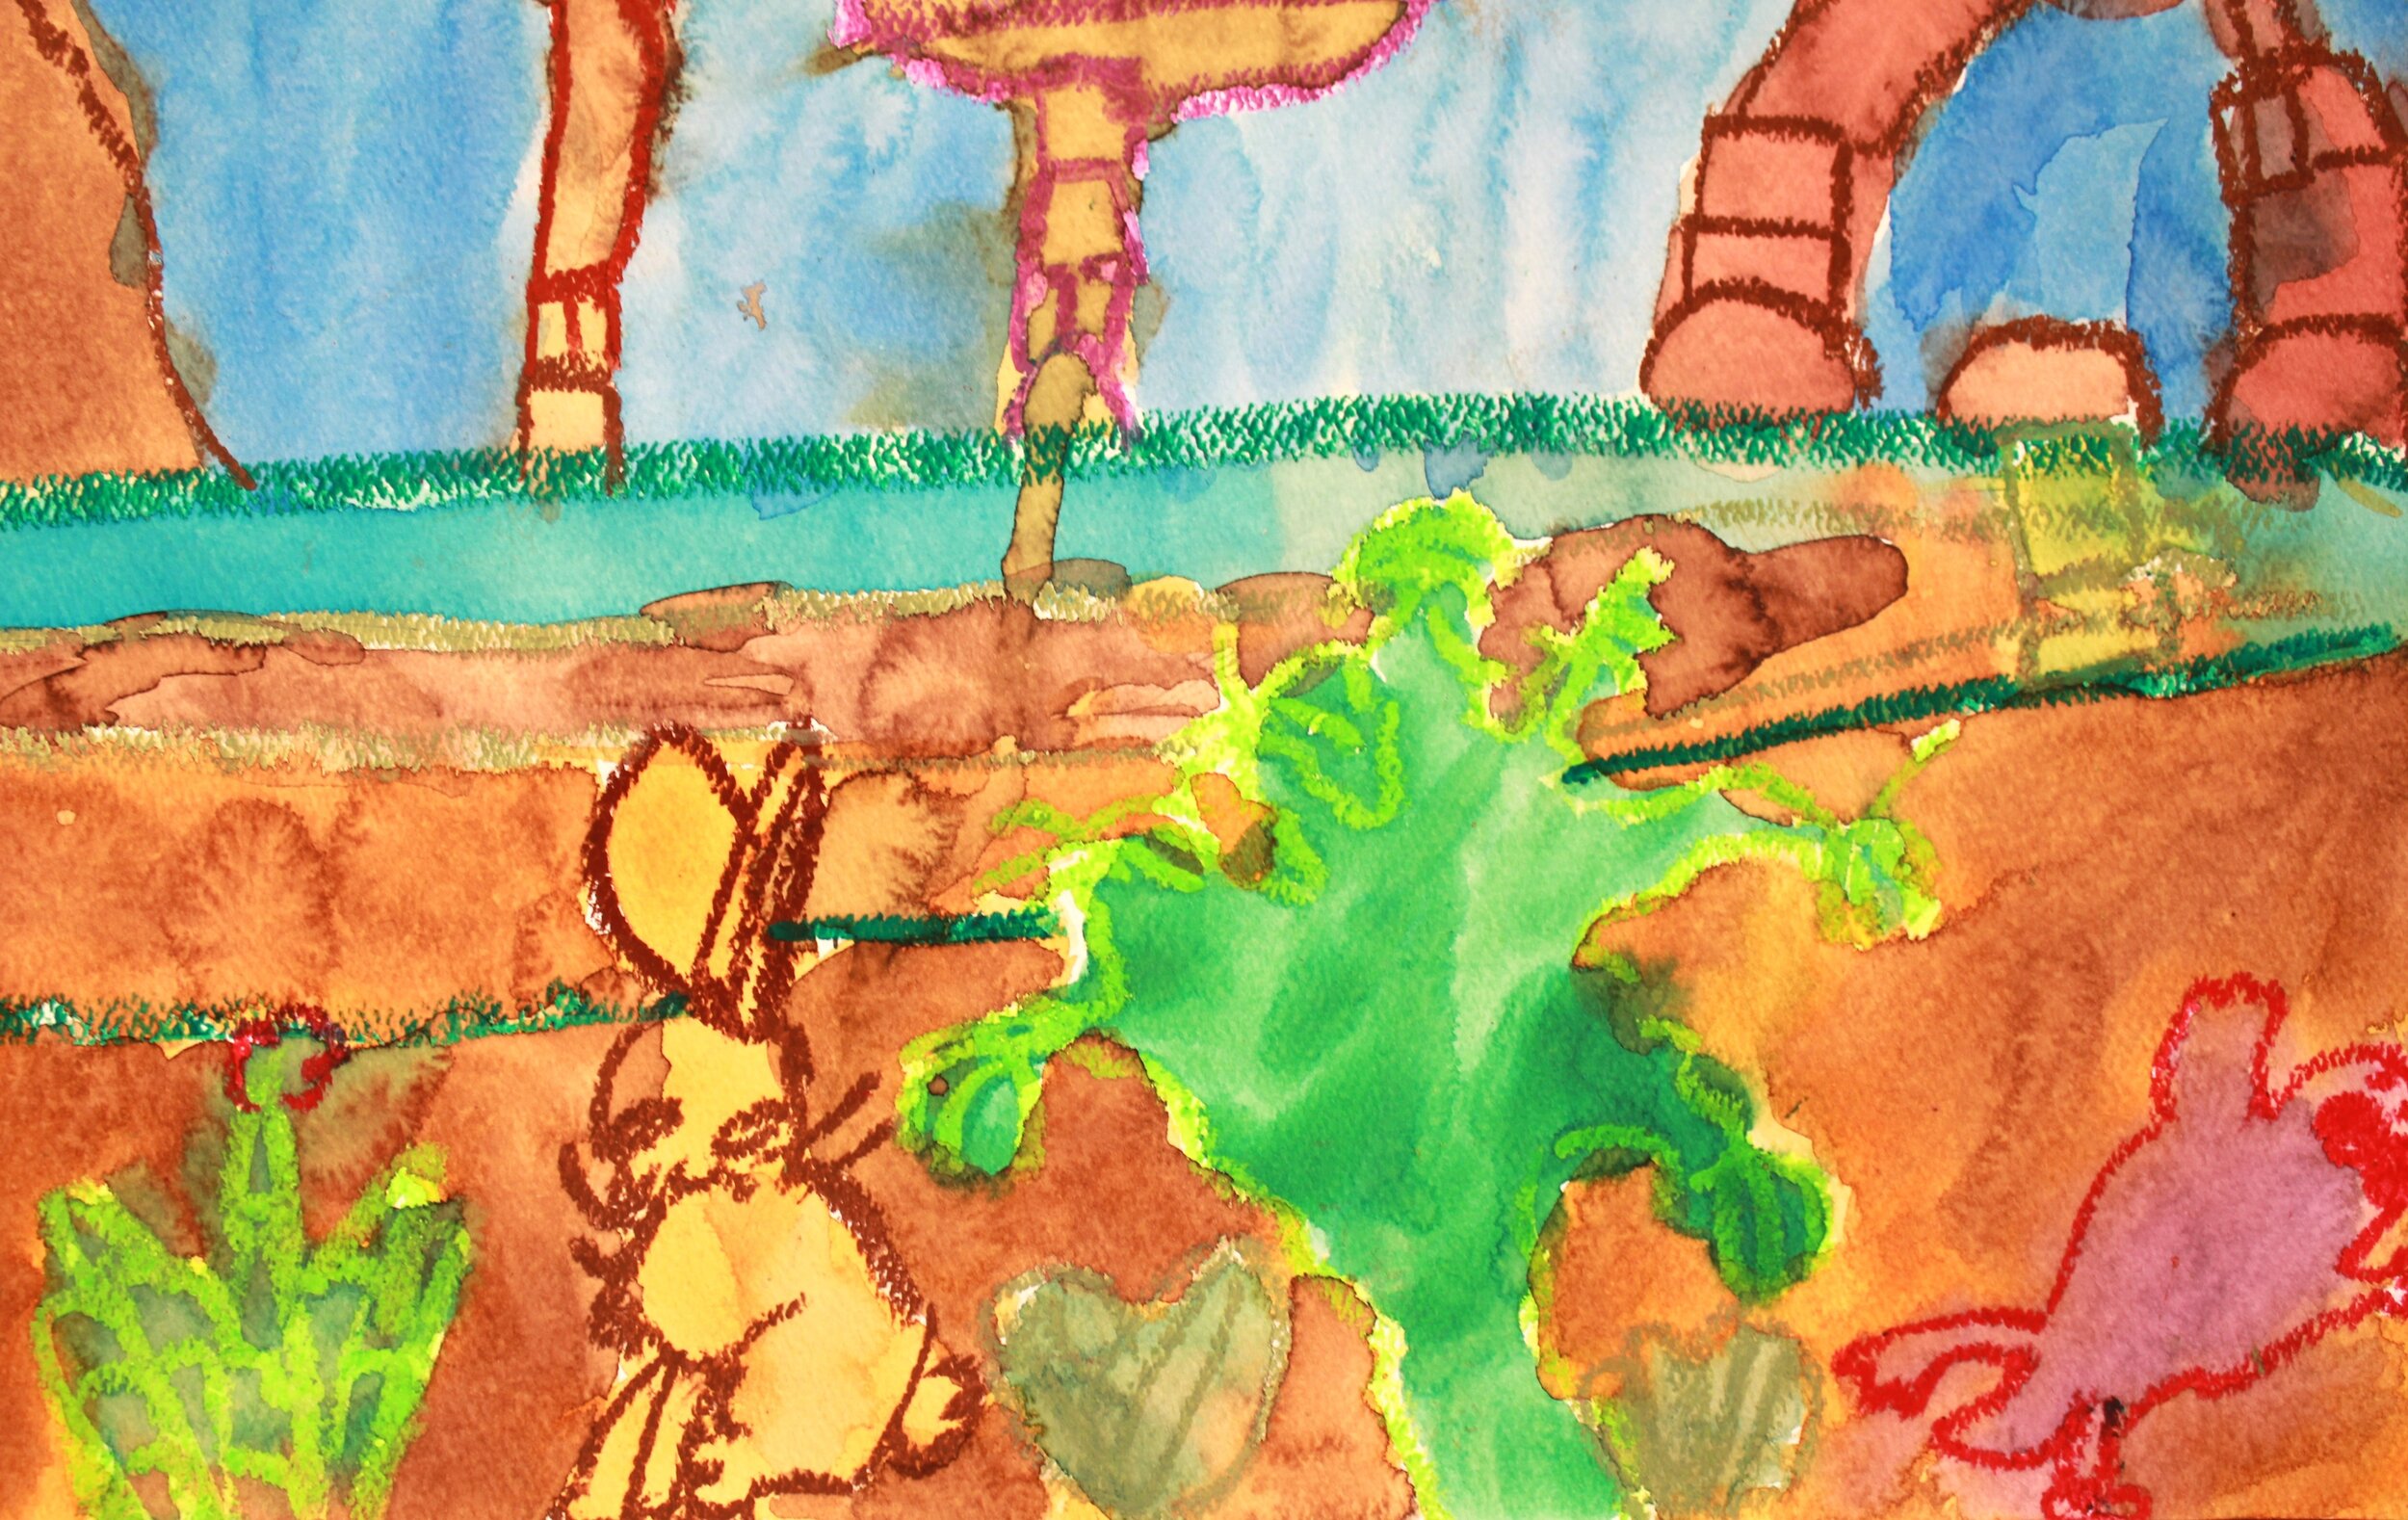 Bryan_Grade 3_Landscape with Rabbit_Watercolor and Oil Pastel_detail_.jpg